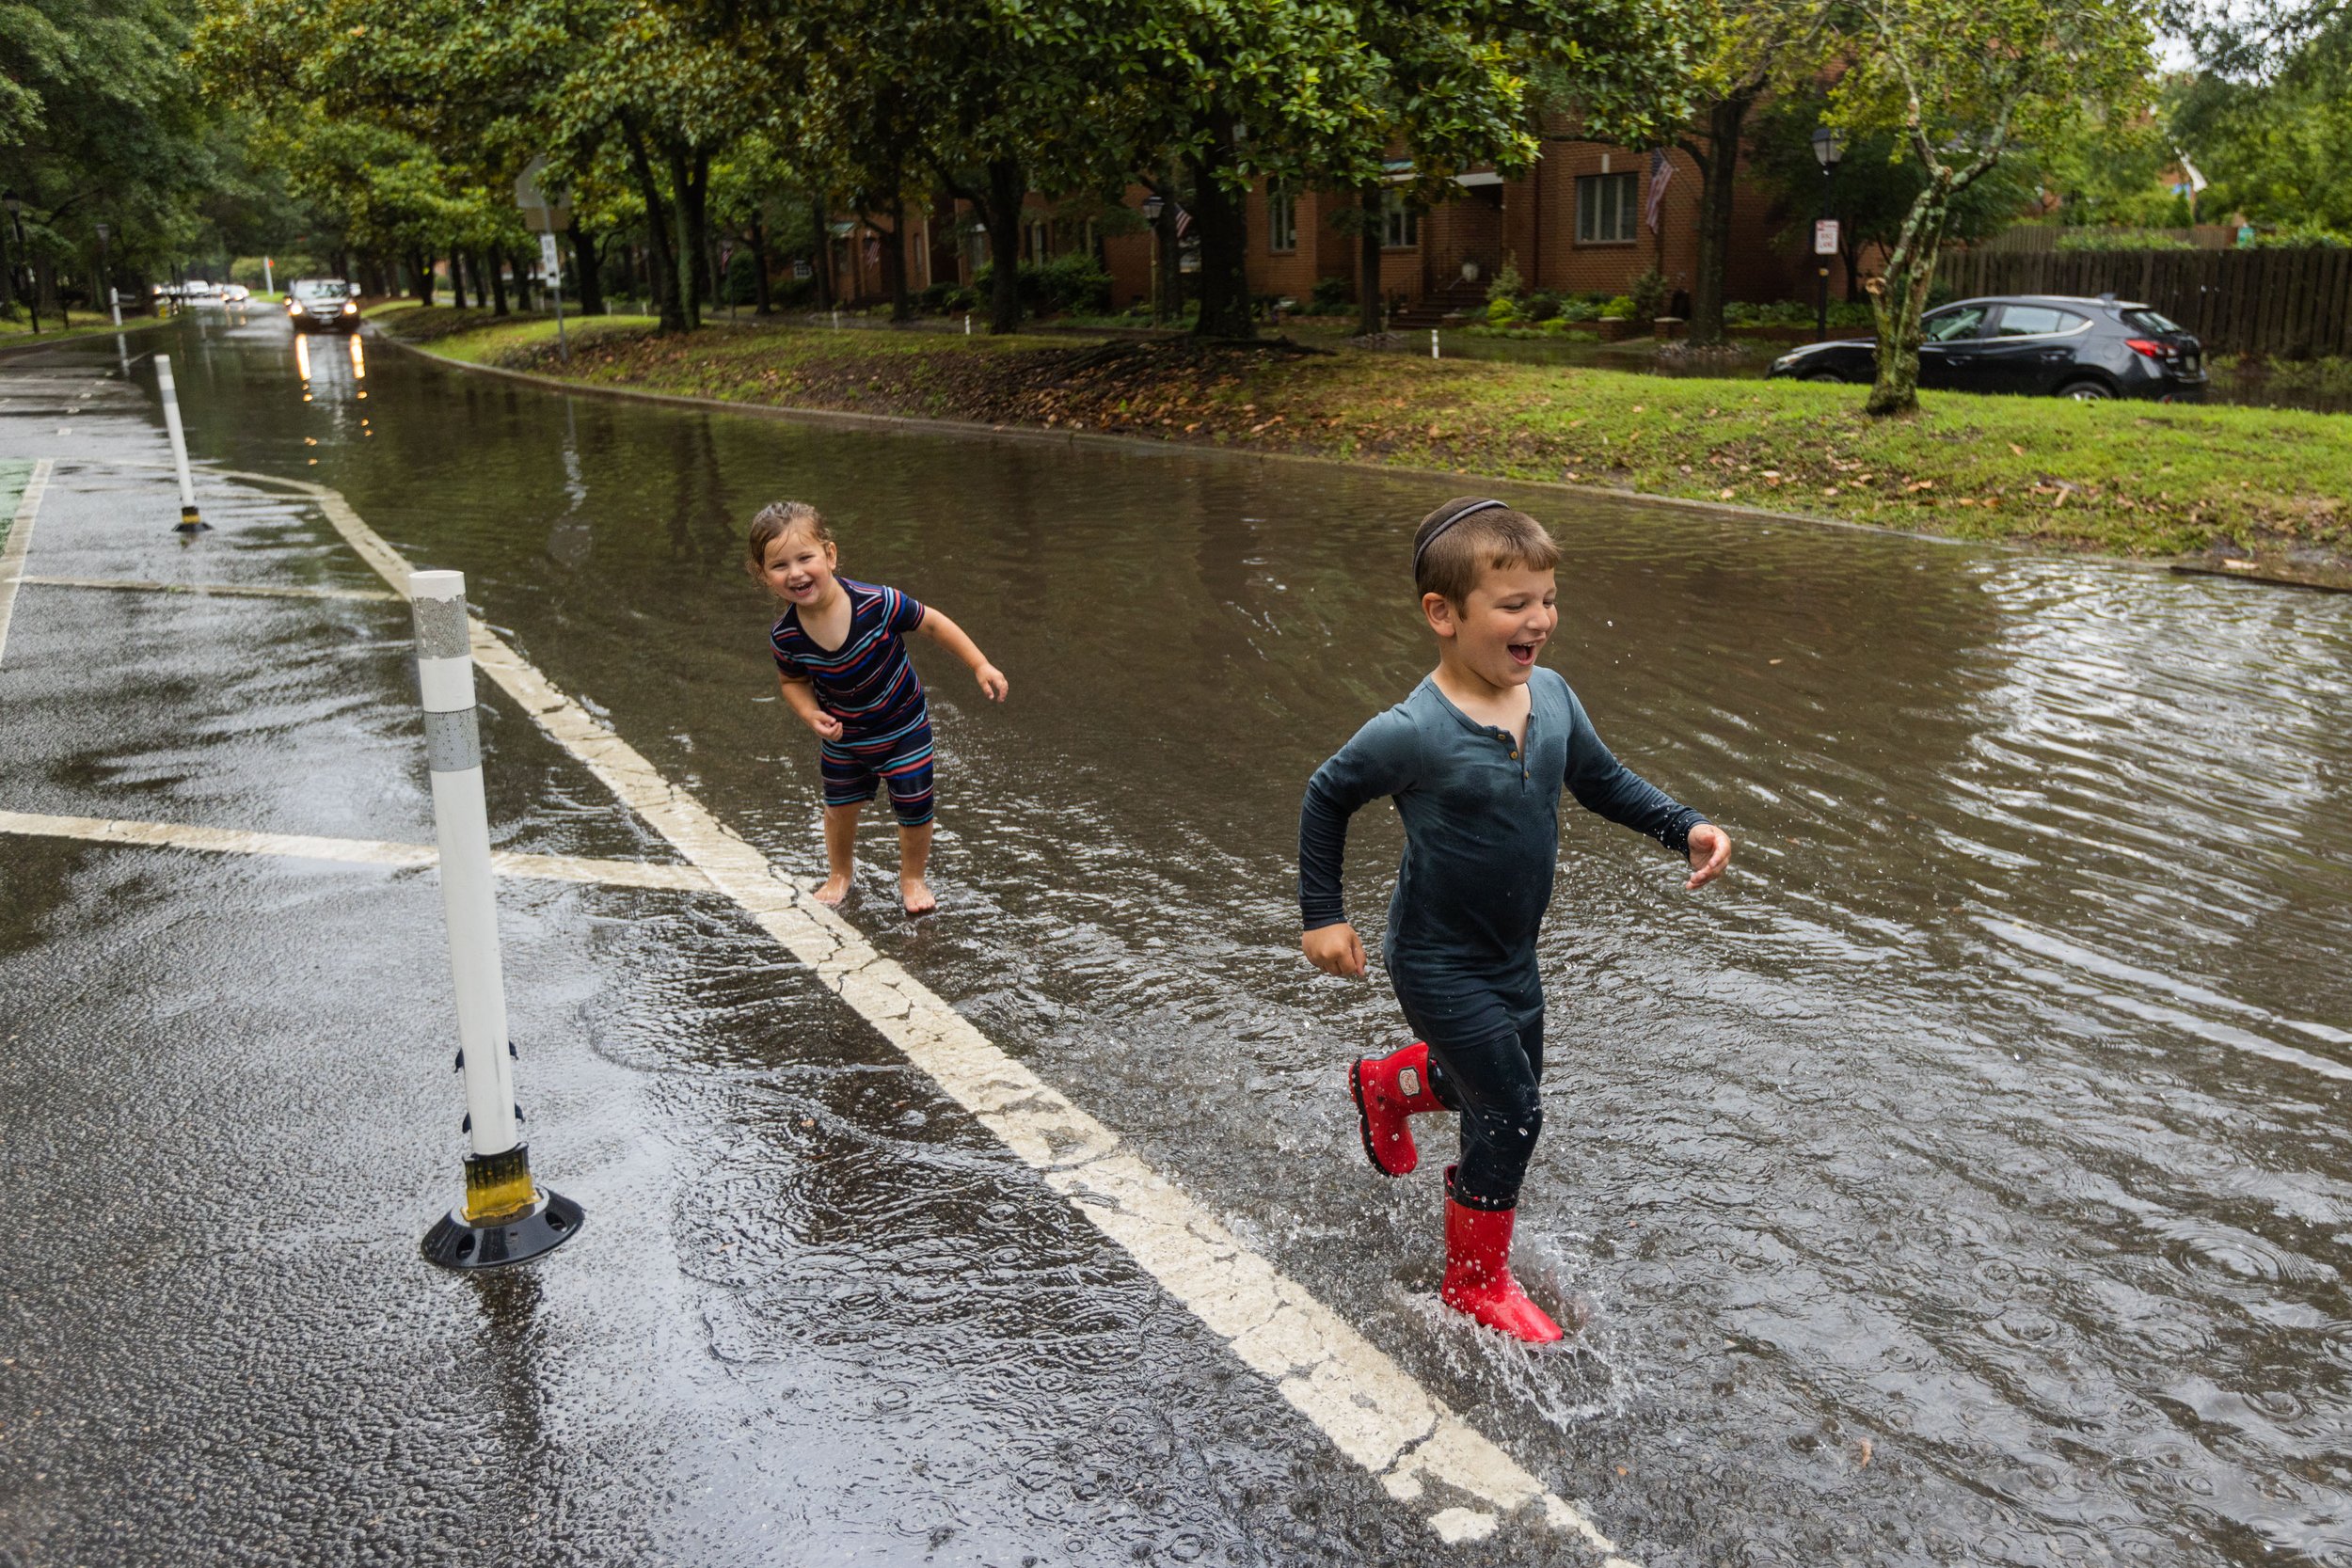  Benny Katz, 3, center, and brother Yossi Katz, 4, right, run in standing water near Maury High School at 5 p.m. after storms move through Norfolk, Va. on Wednesday, July 19, 2023. (Tess Crowley / The Virginian-Pilot) 